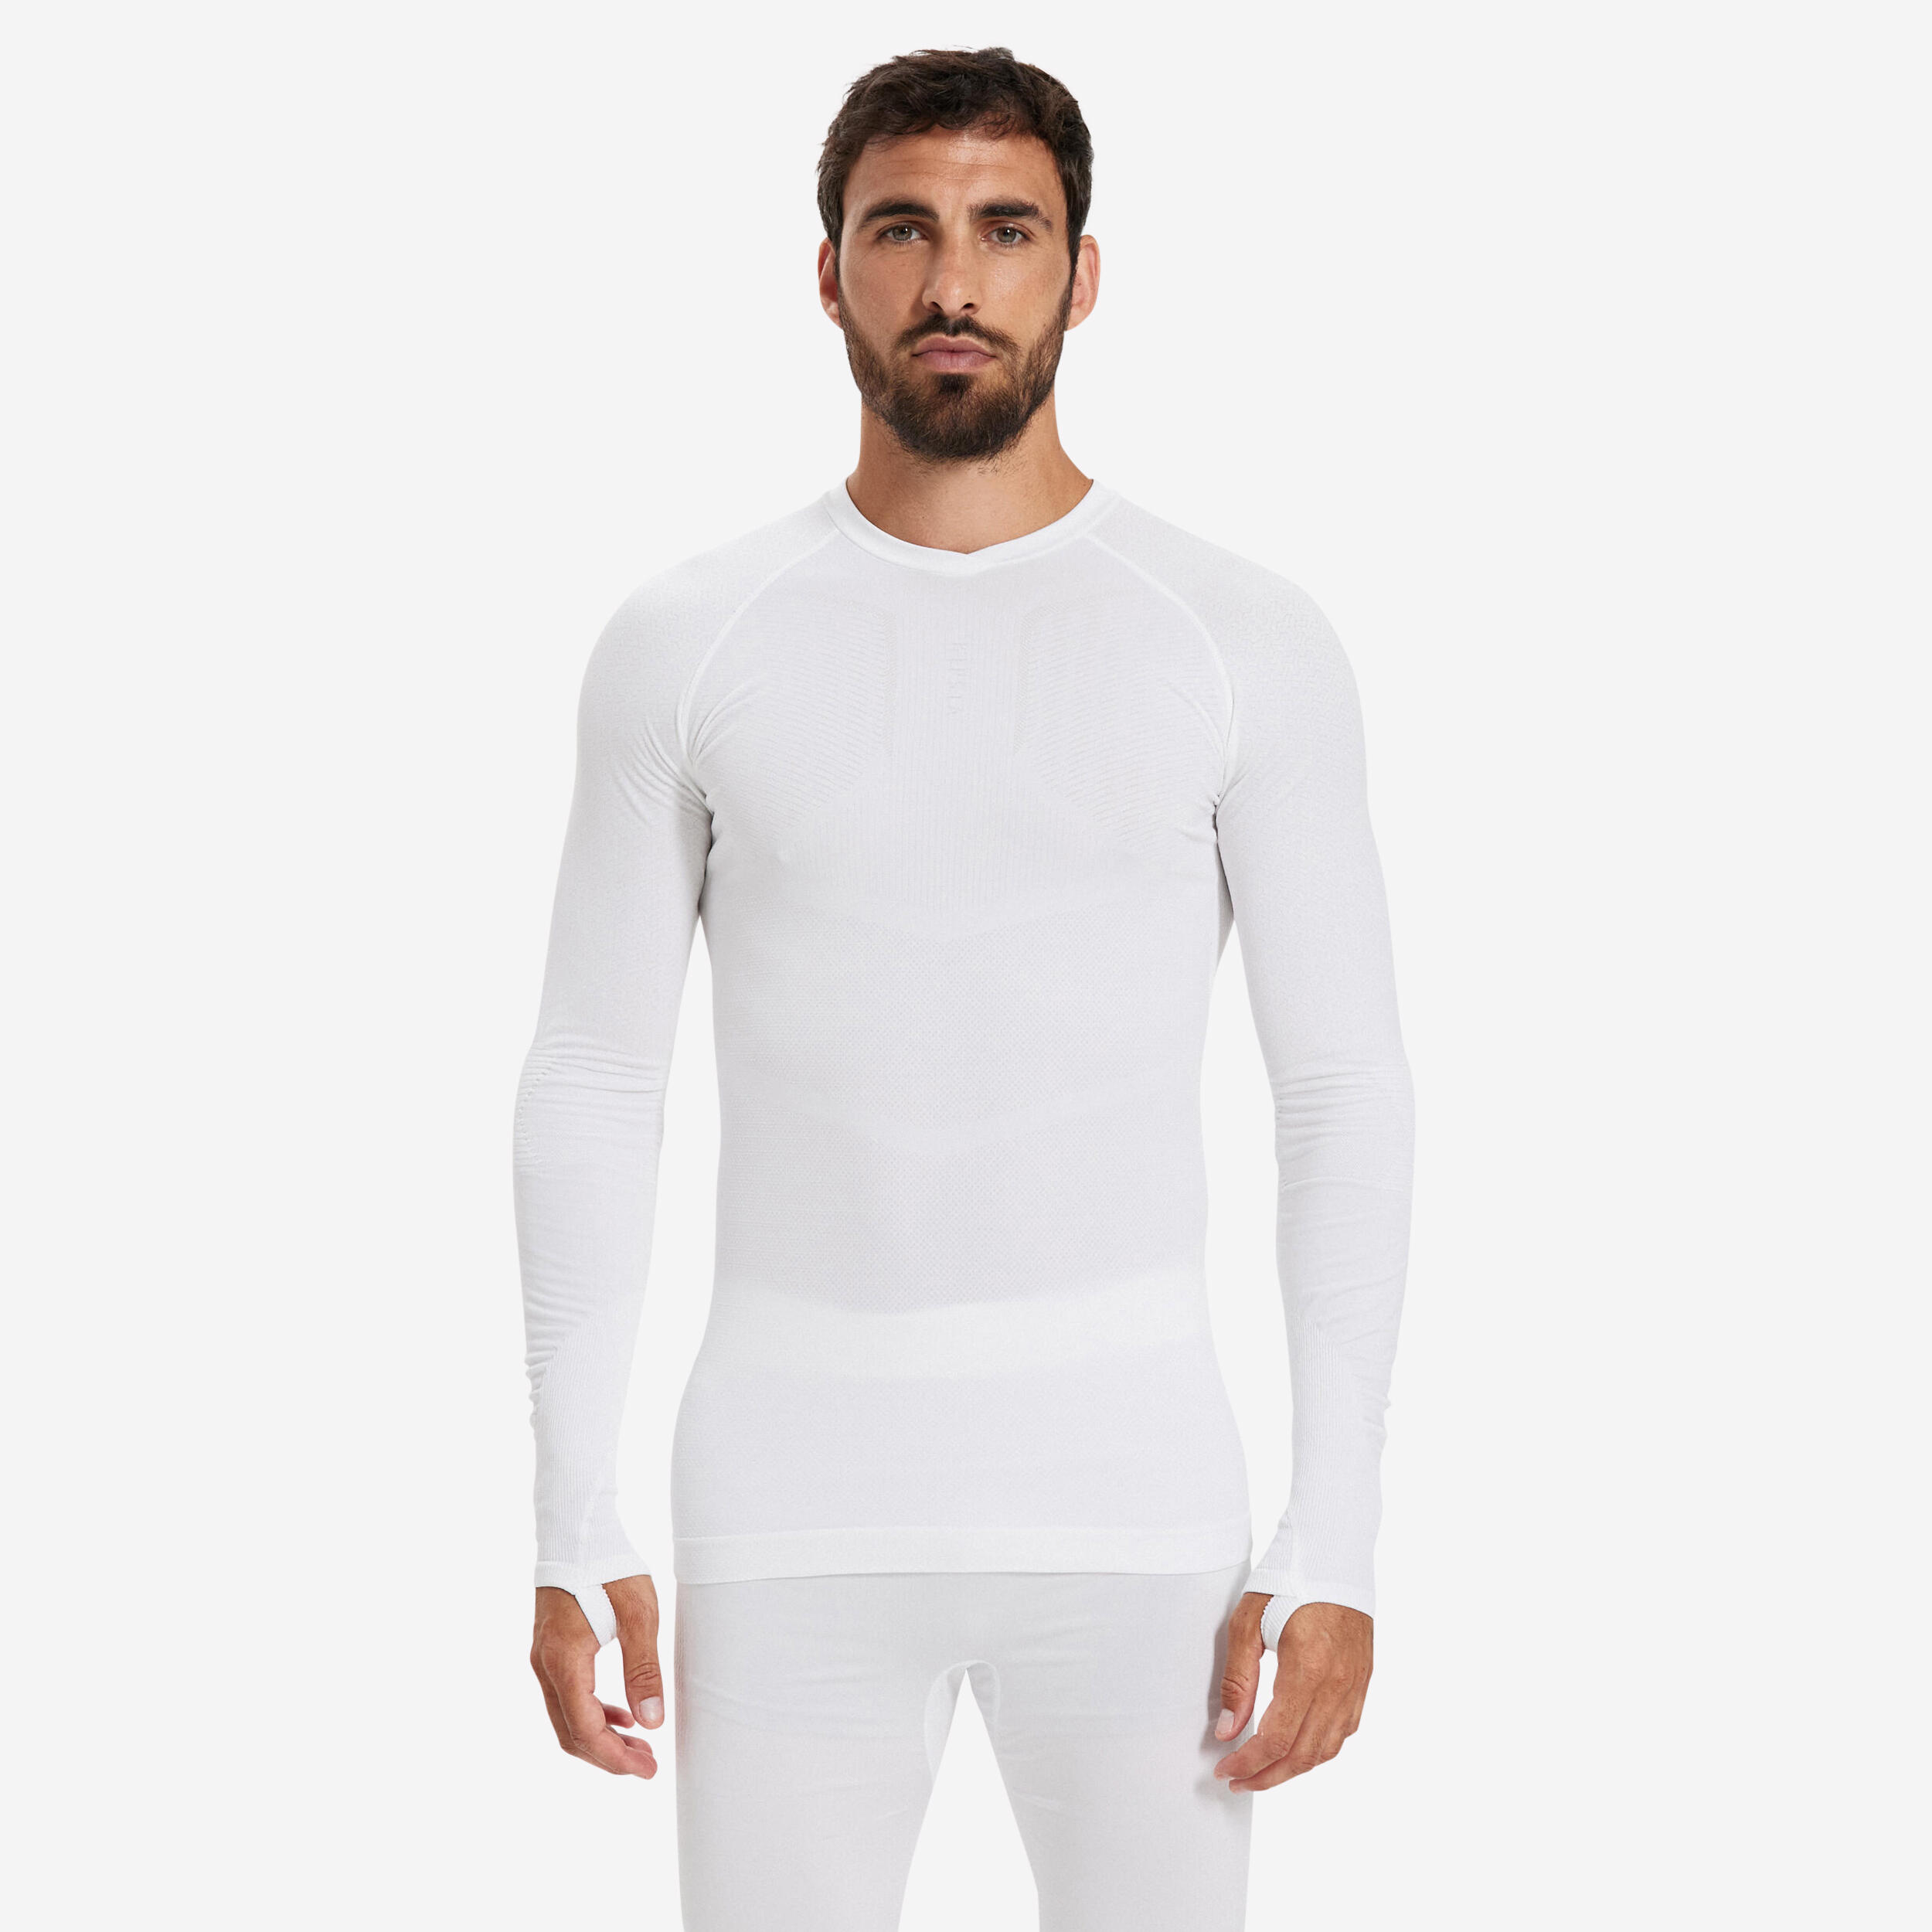 Adult Long-Sleeved Thermal Base Layer Top Keepdry 500 - White 1/13